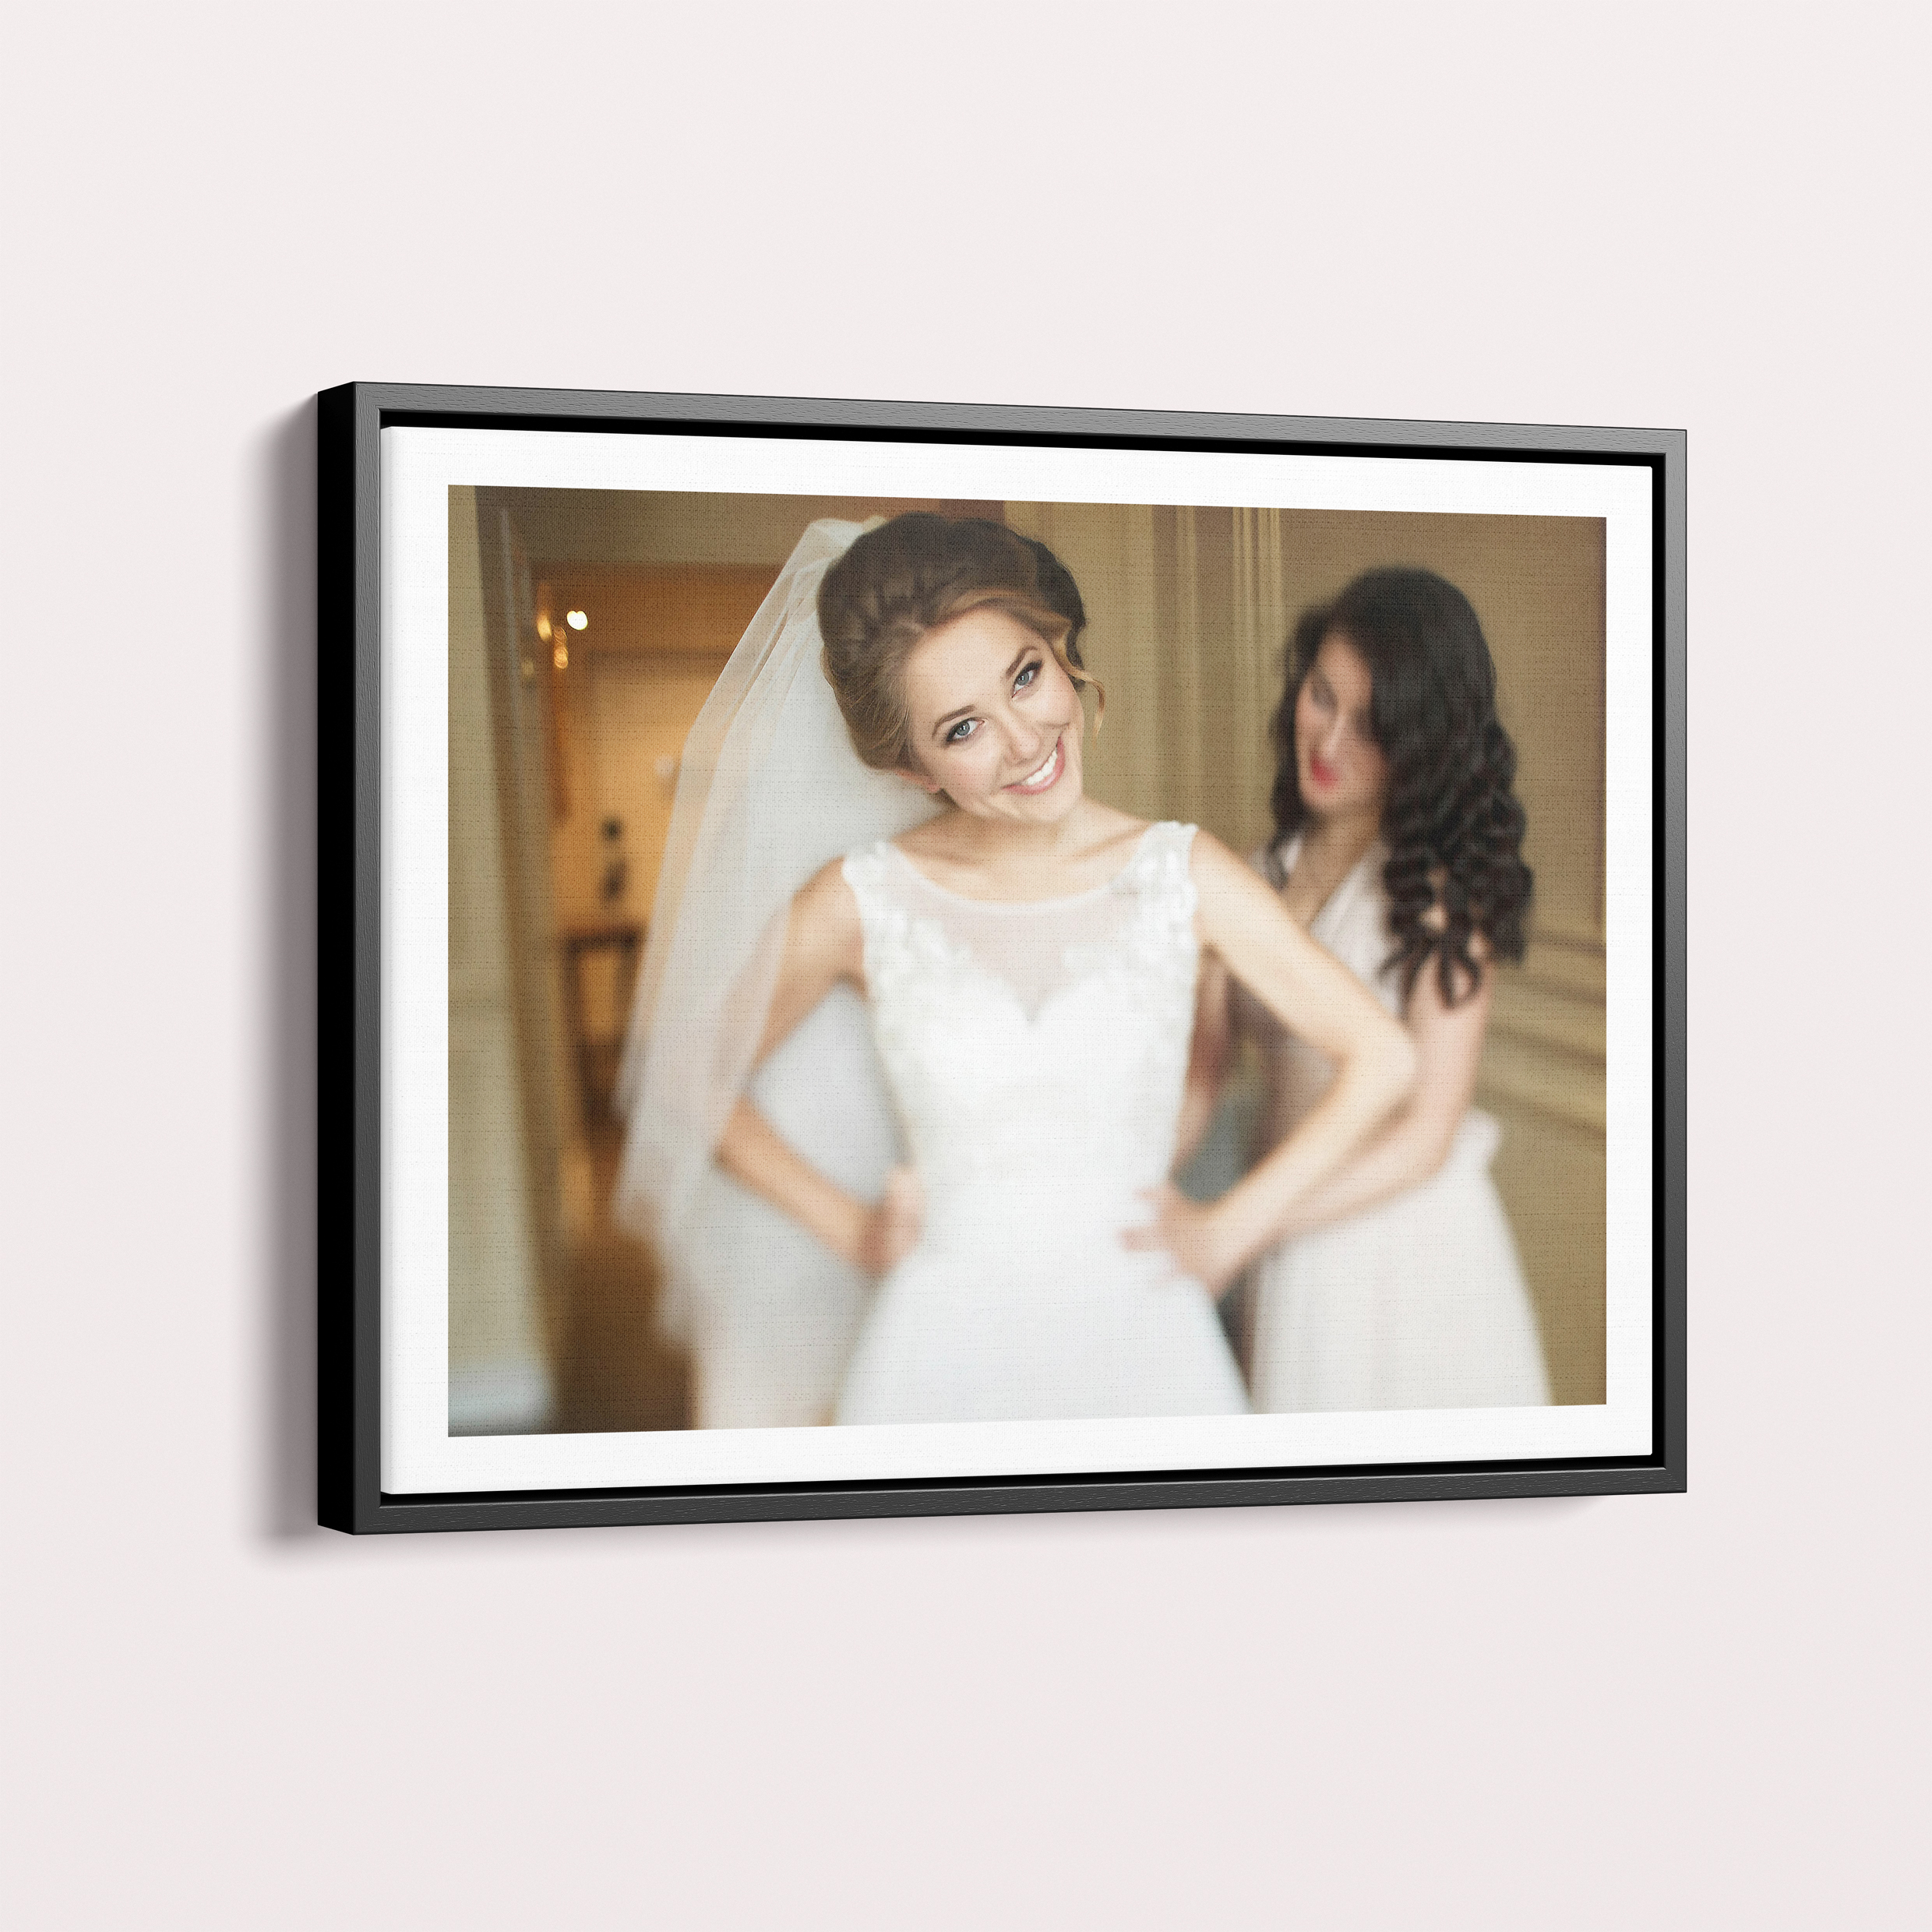 Personalised Landscape White Wedding Framed Photo Canvas - Capture Love with Utterly Printable